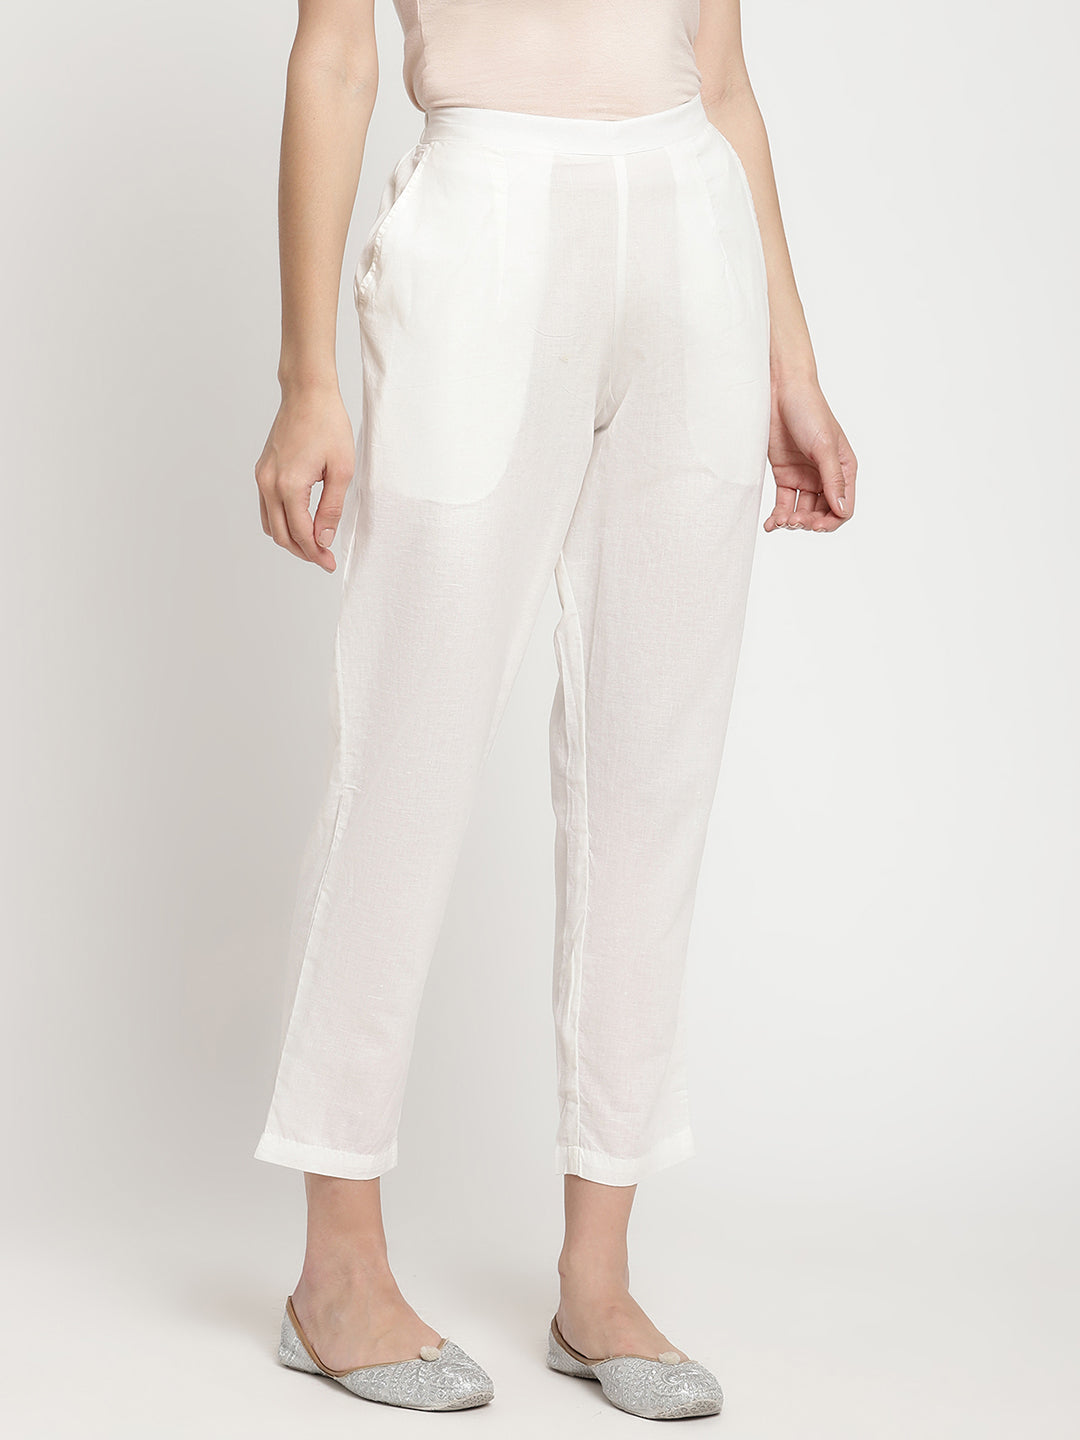 Attention, pant lovers! This White Cotton Straight Pant is your dream come true. Semi-elasticated, simple and comfortable. Shop | COD + free shipping available.